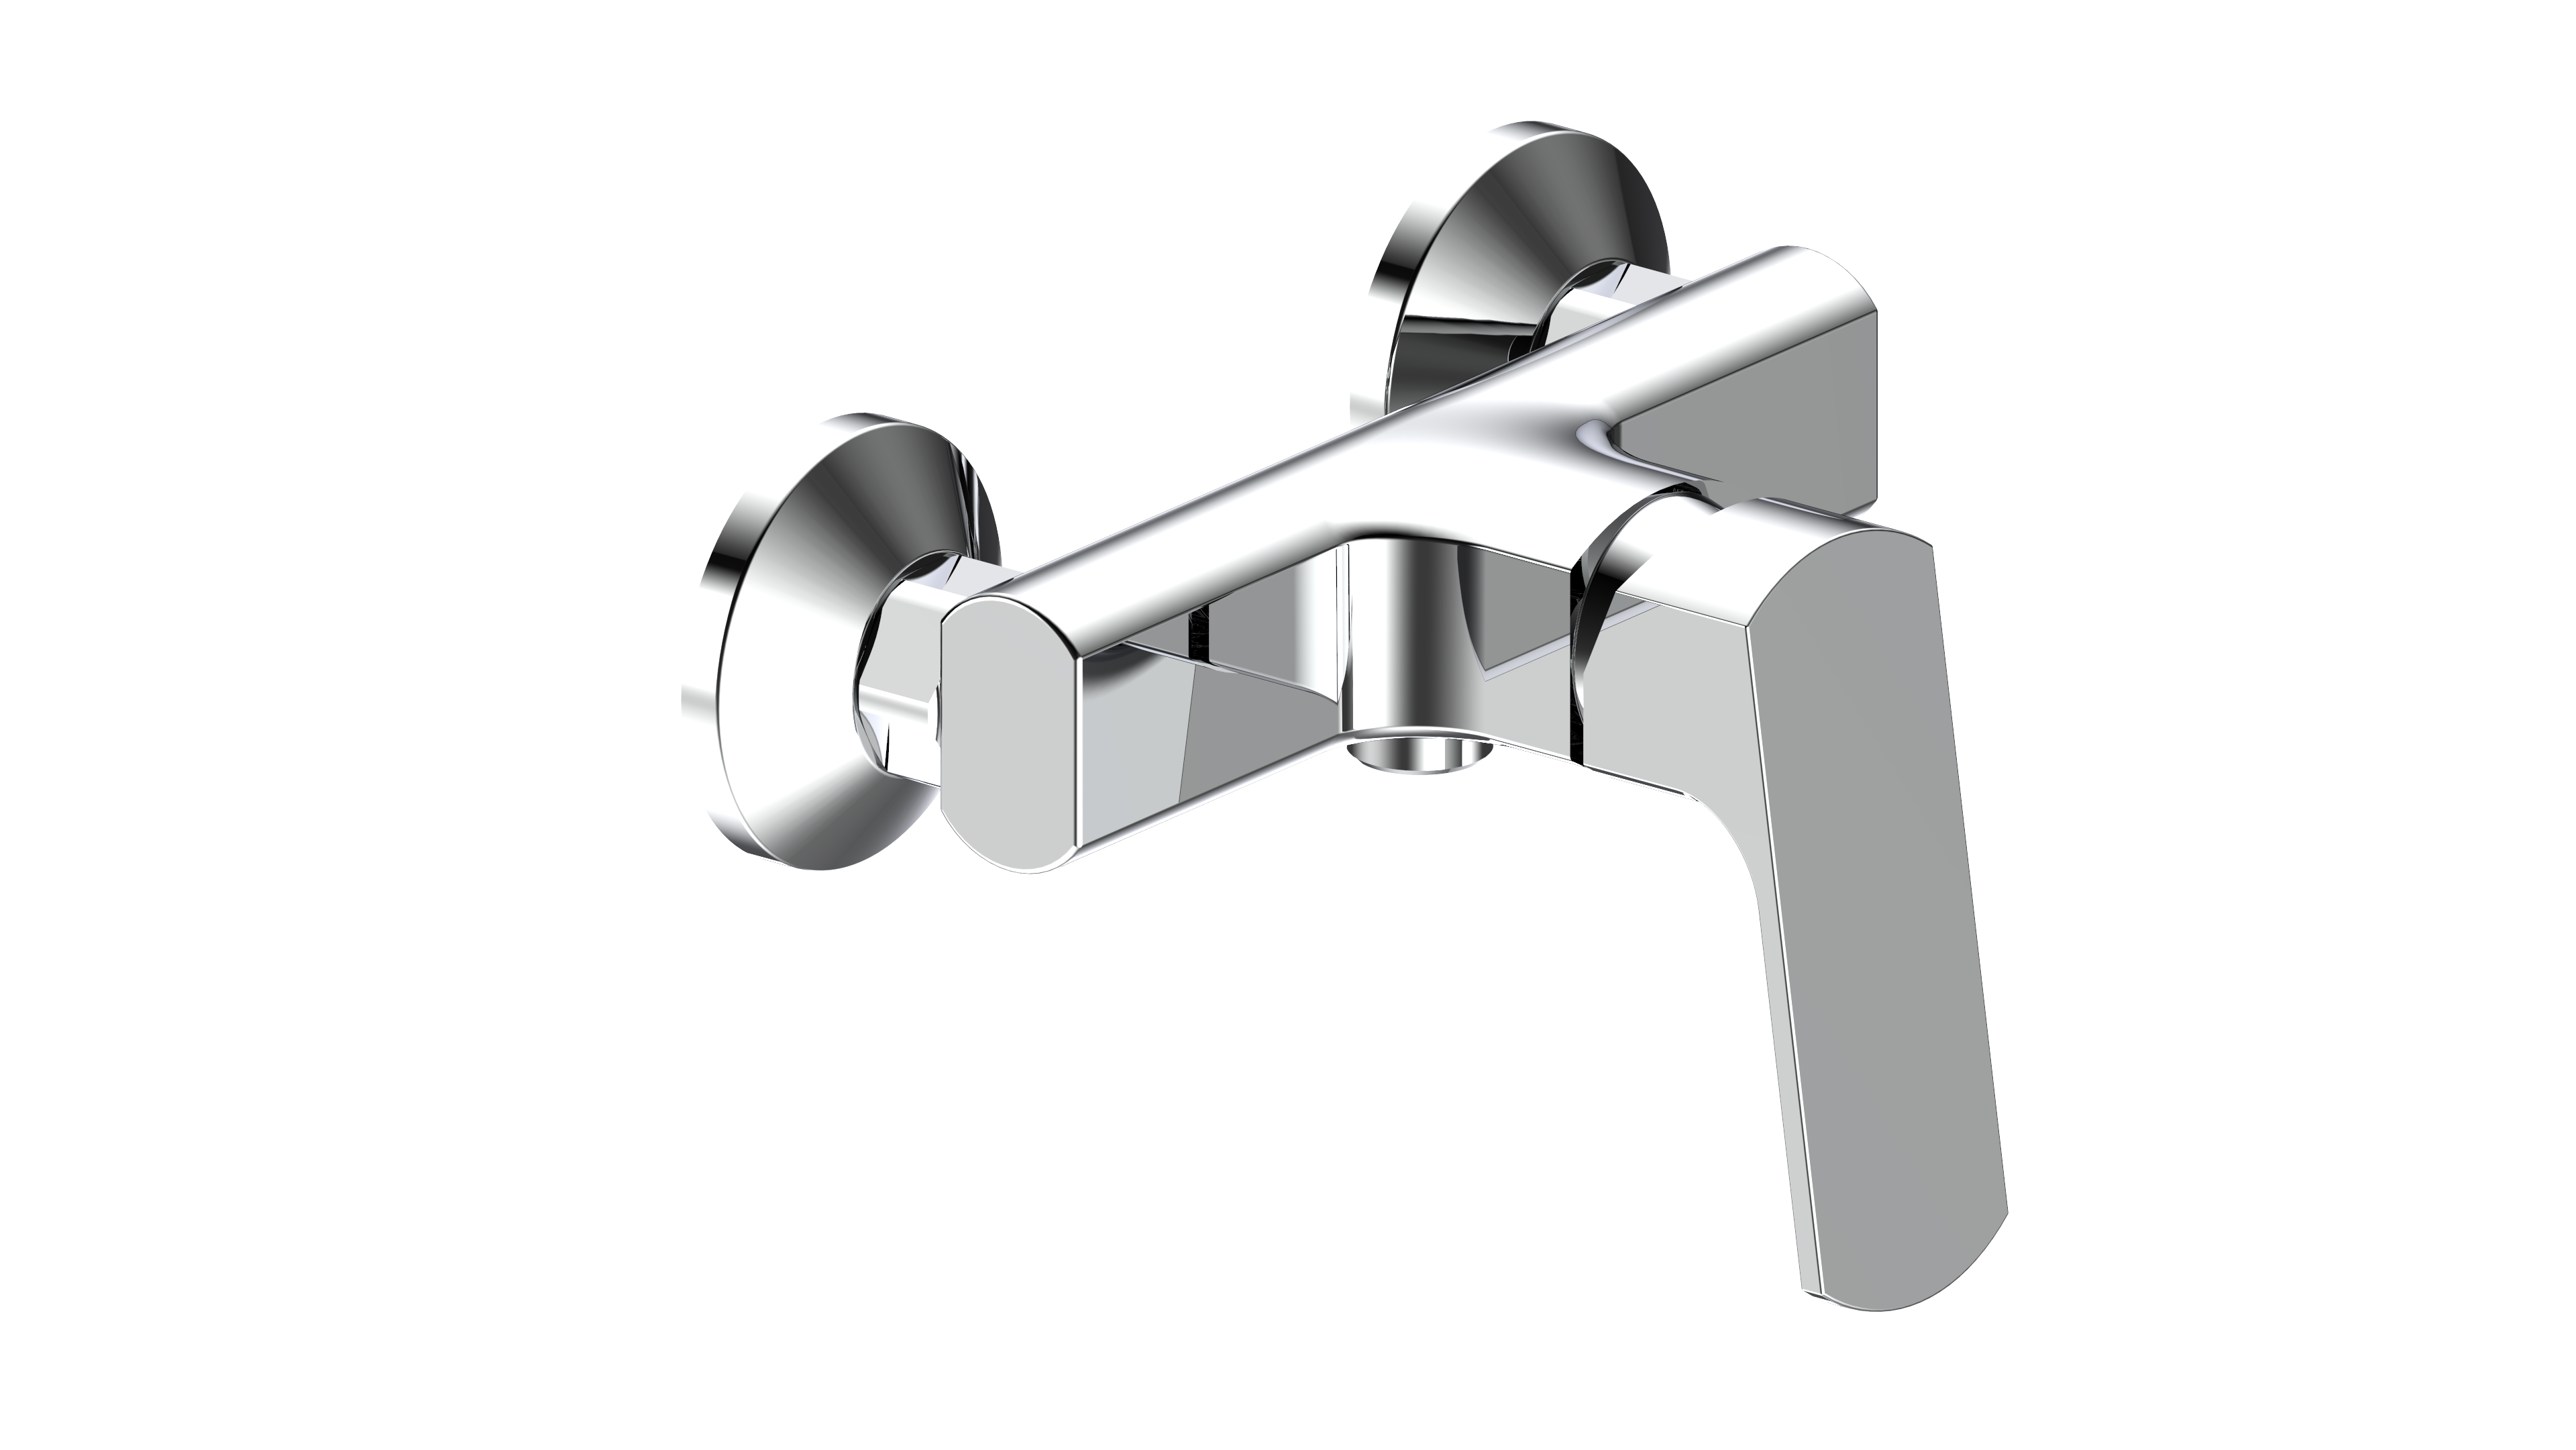 Single Lever Kitchen Faucets: The Convenience of One Handle Control